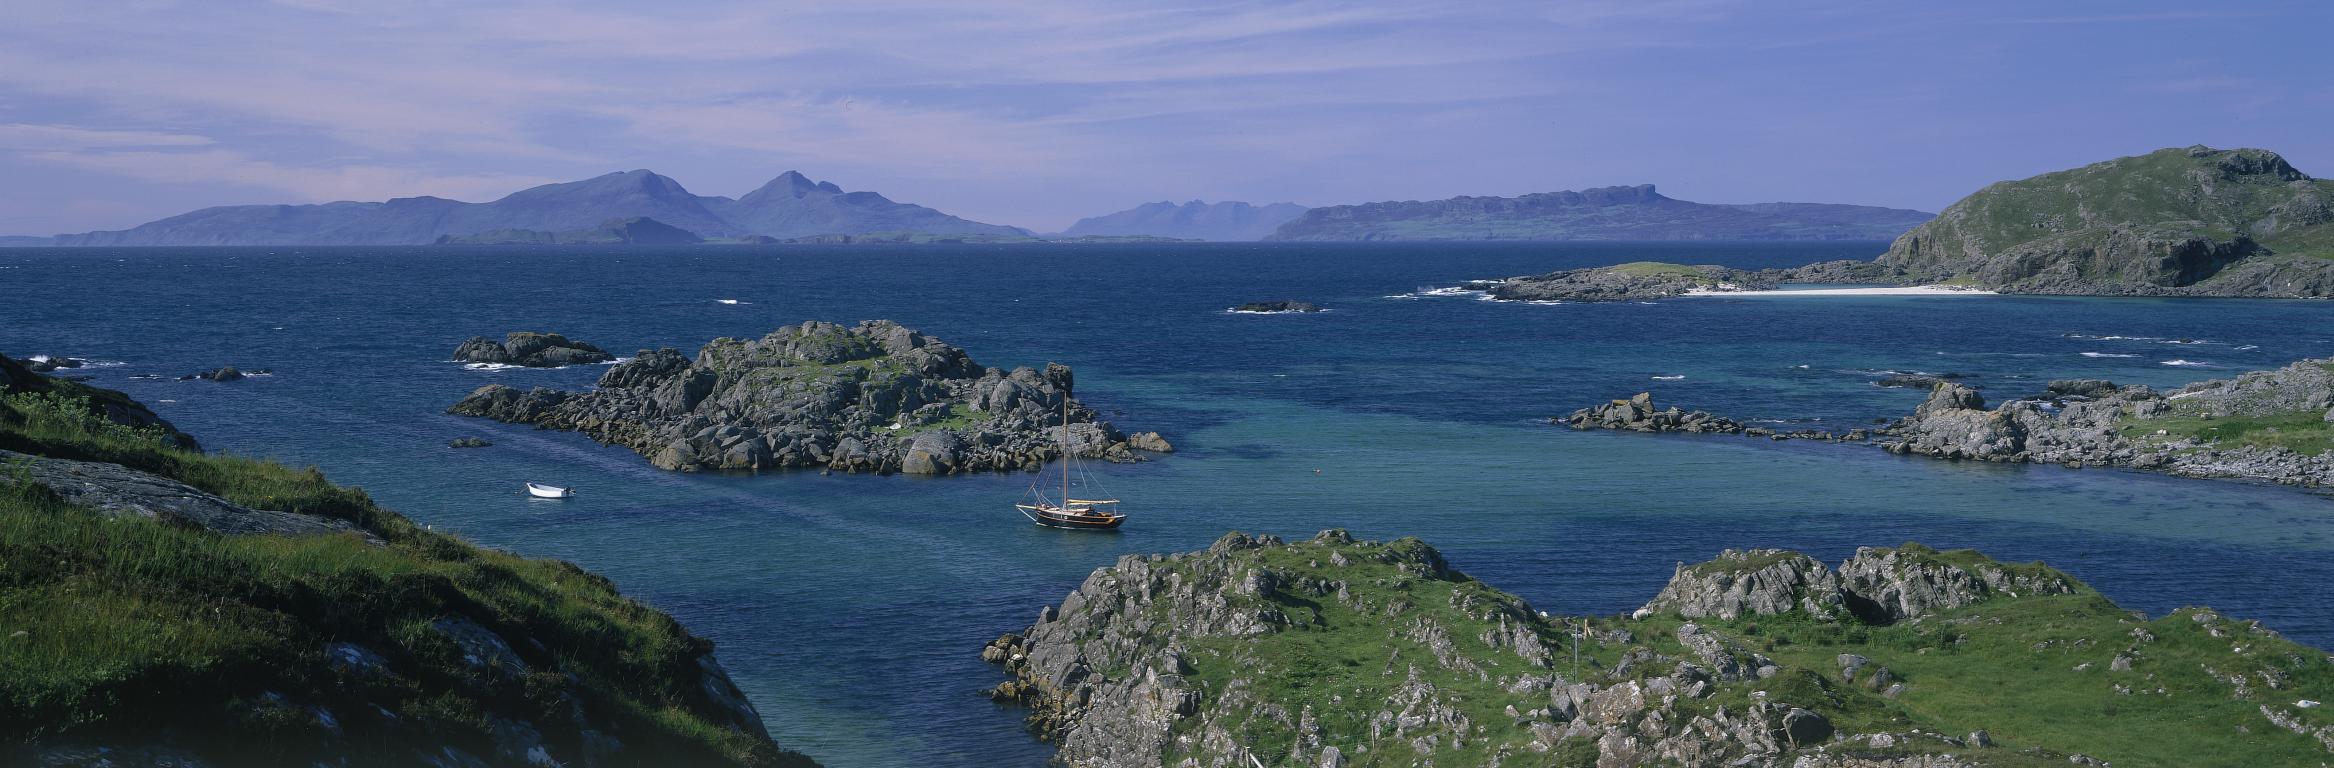 Ardnamurchan Coastline looking out to the Small Isles. (Credit: VisitScotland/ Paul Tomkins)